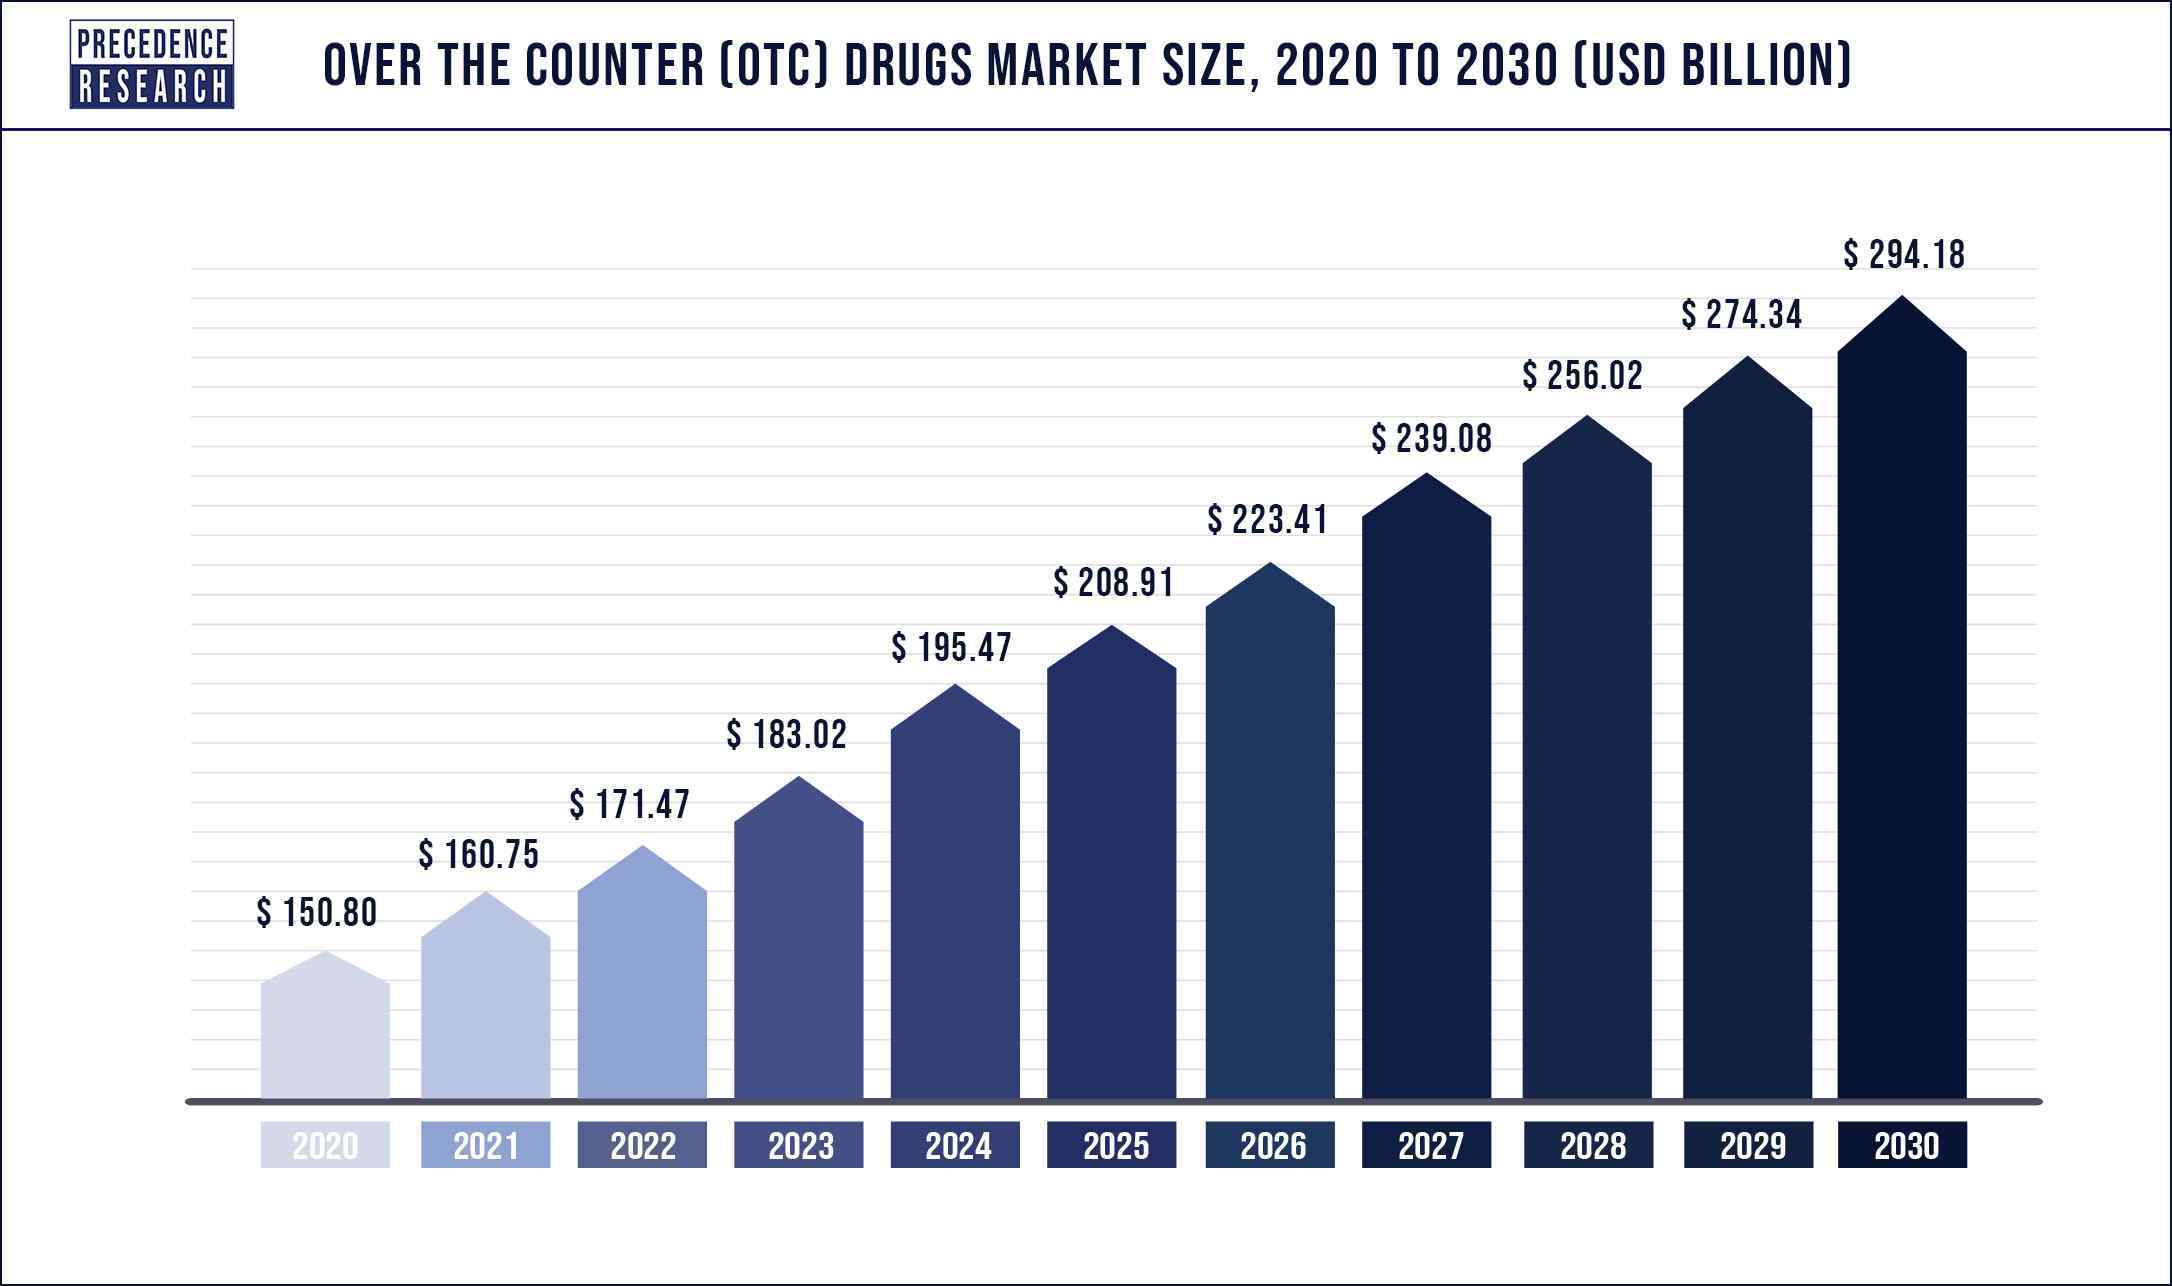 Over the Counter (OTC) Drugs Market Size 2020 to 2030